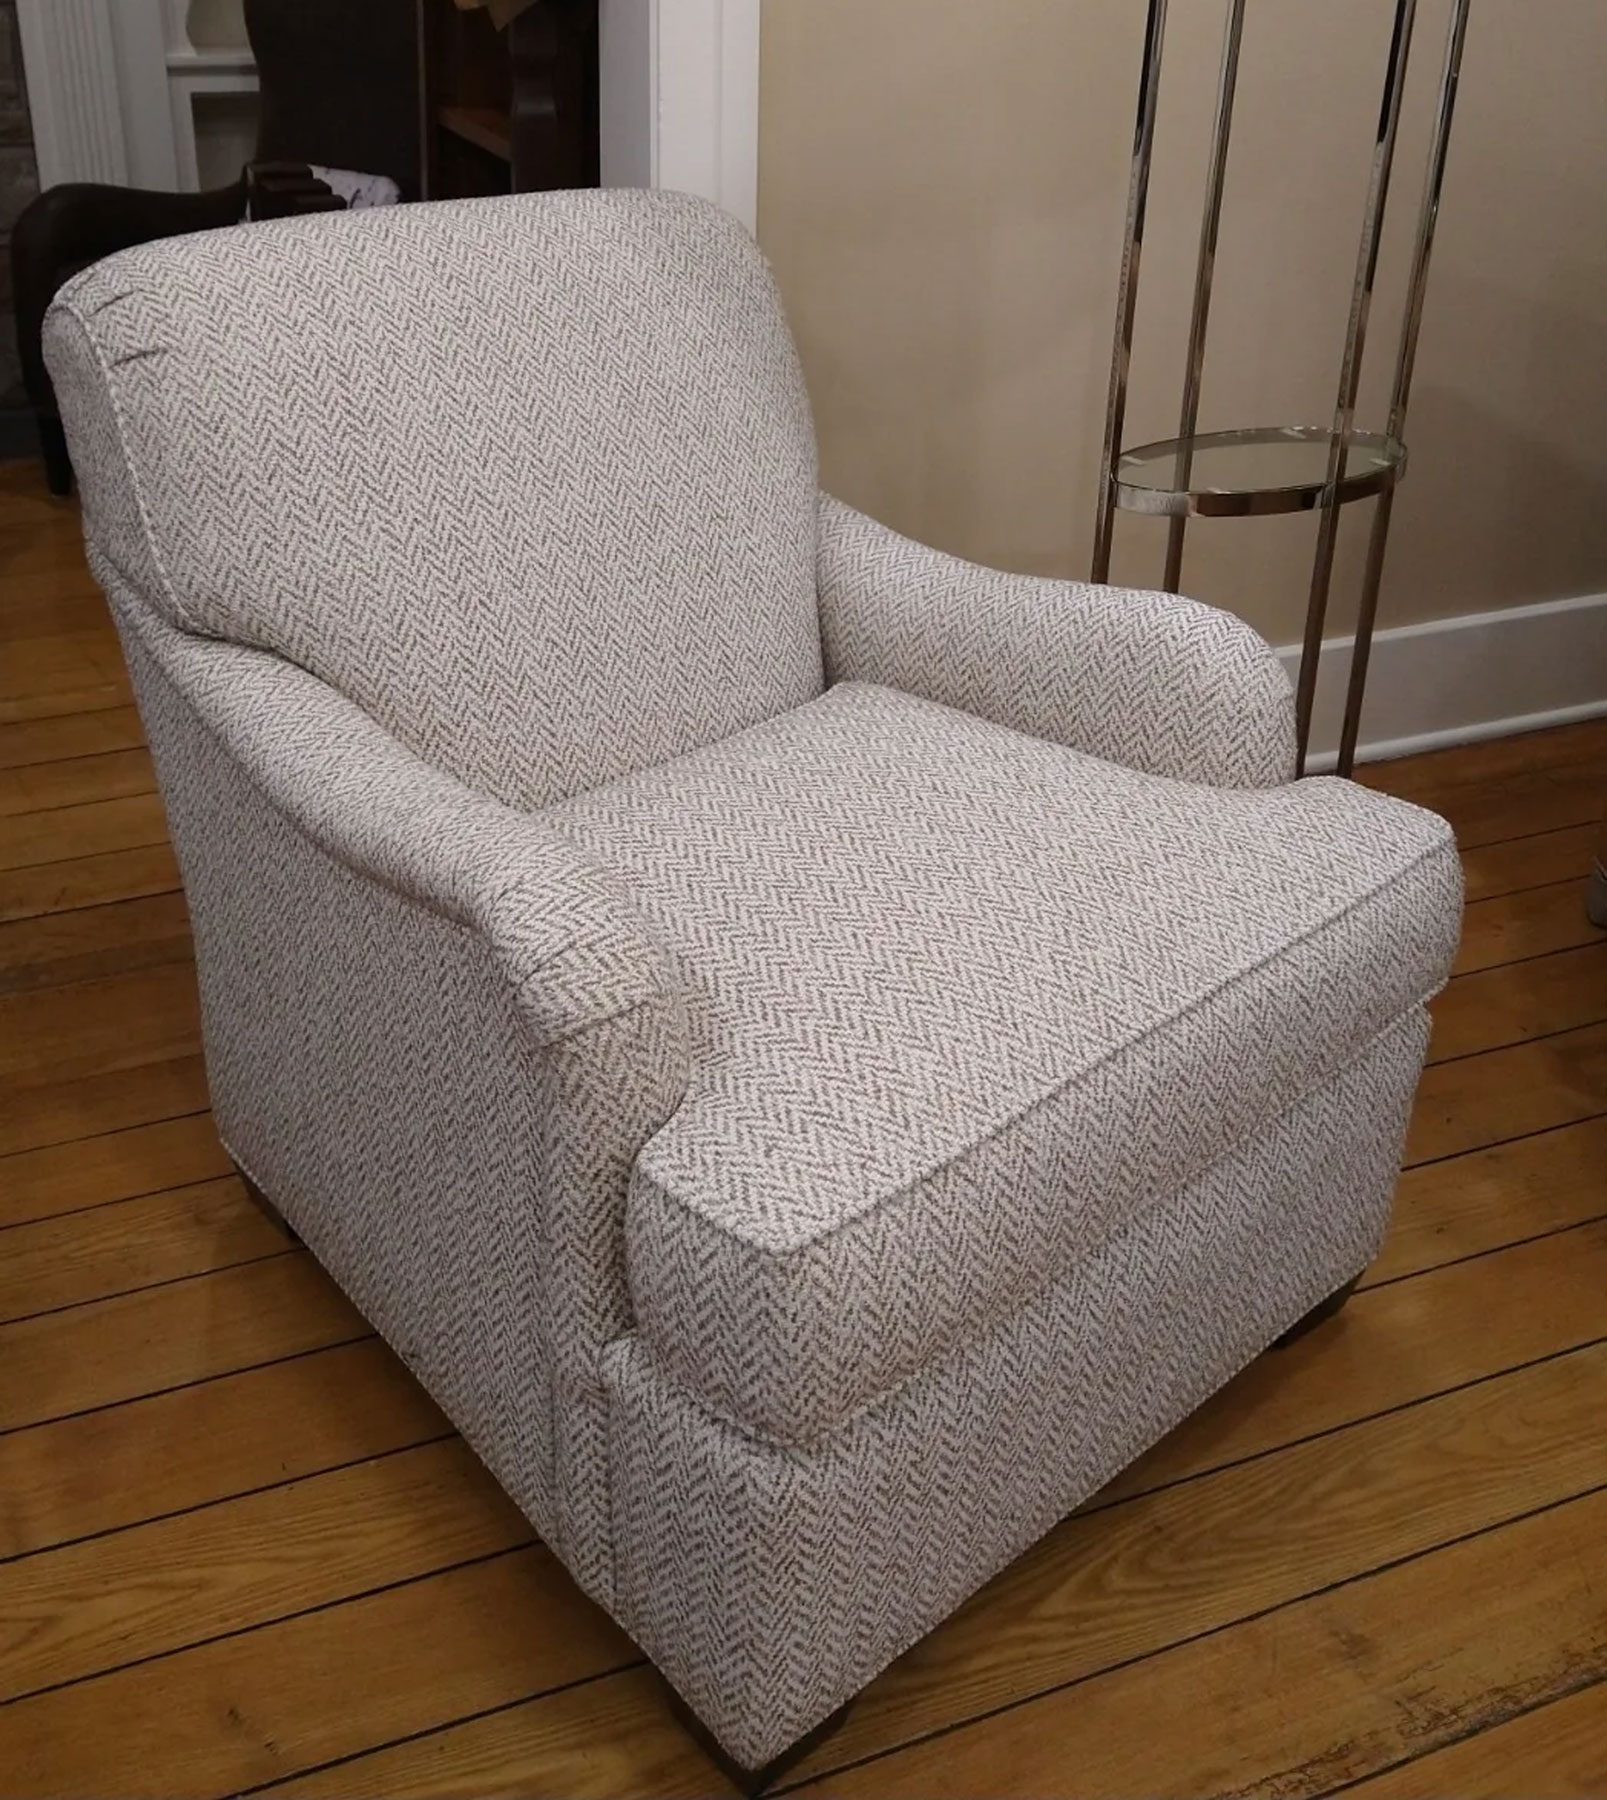 Wesley Hall Signature Elements Lounge Chair in Fabric